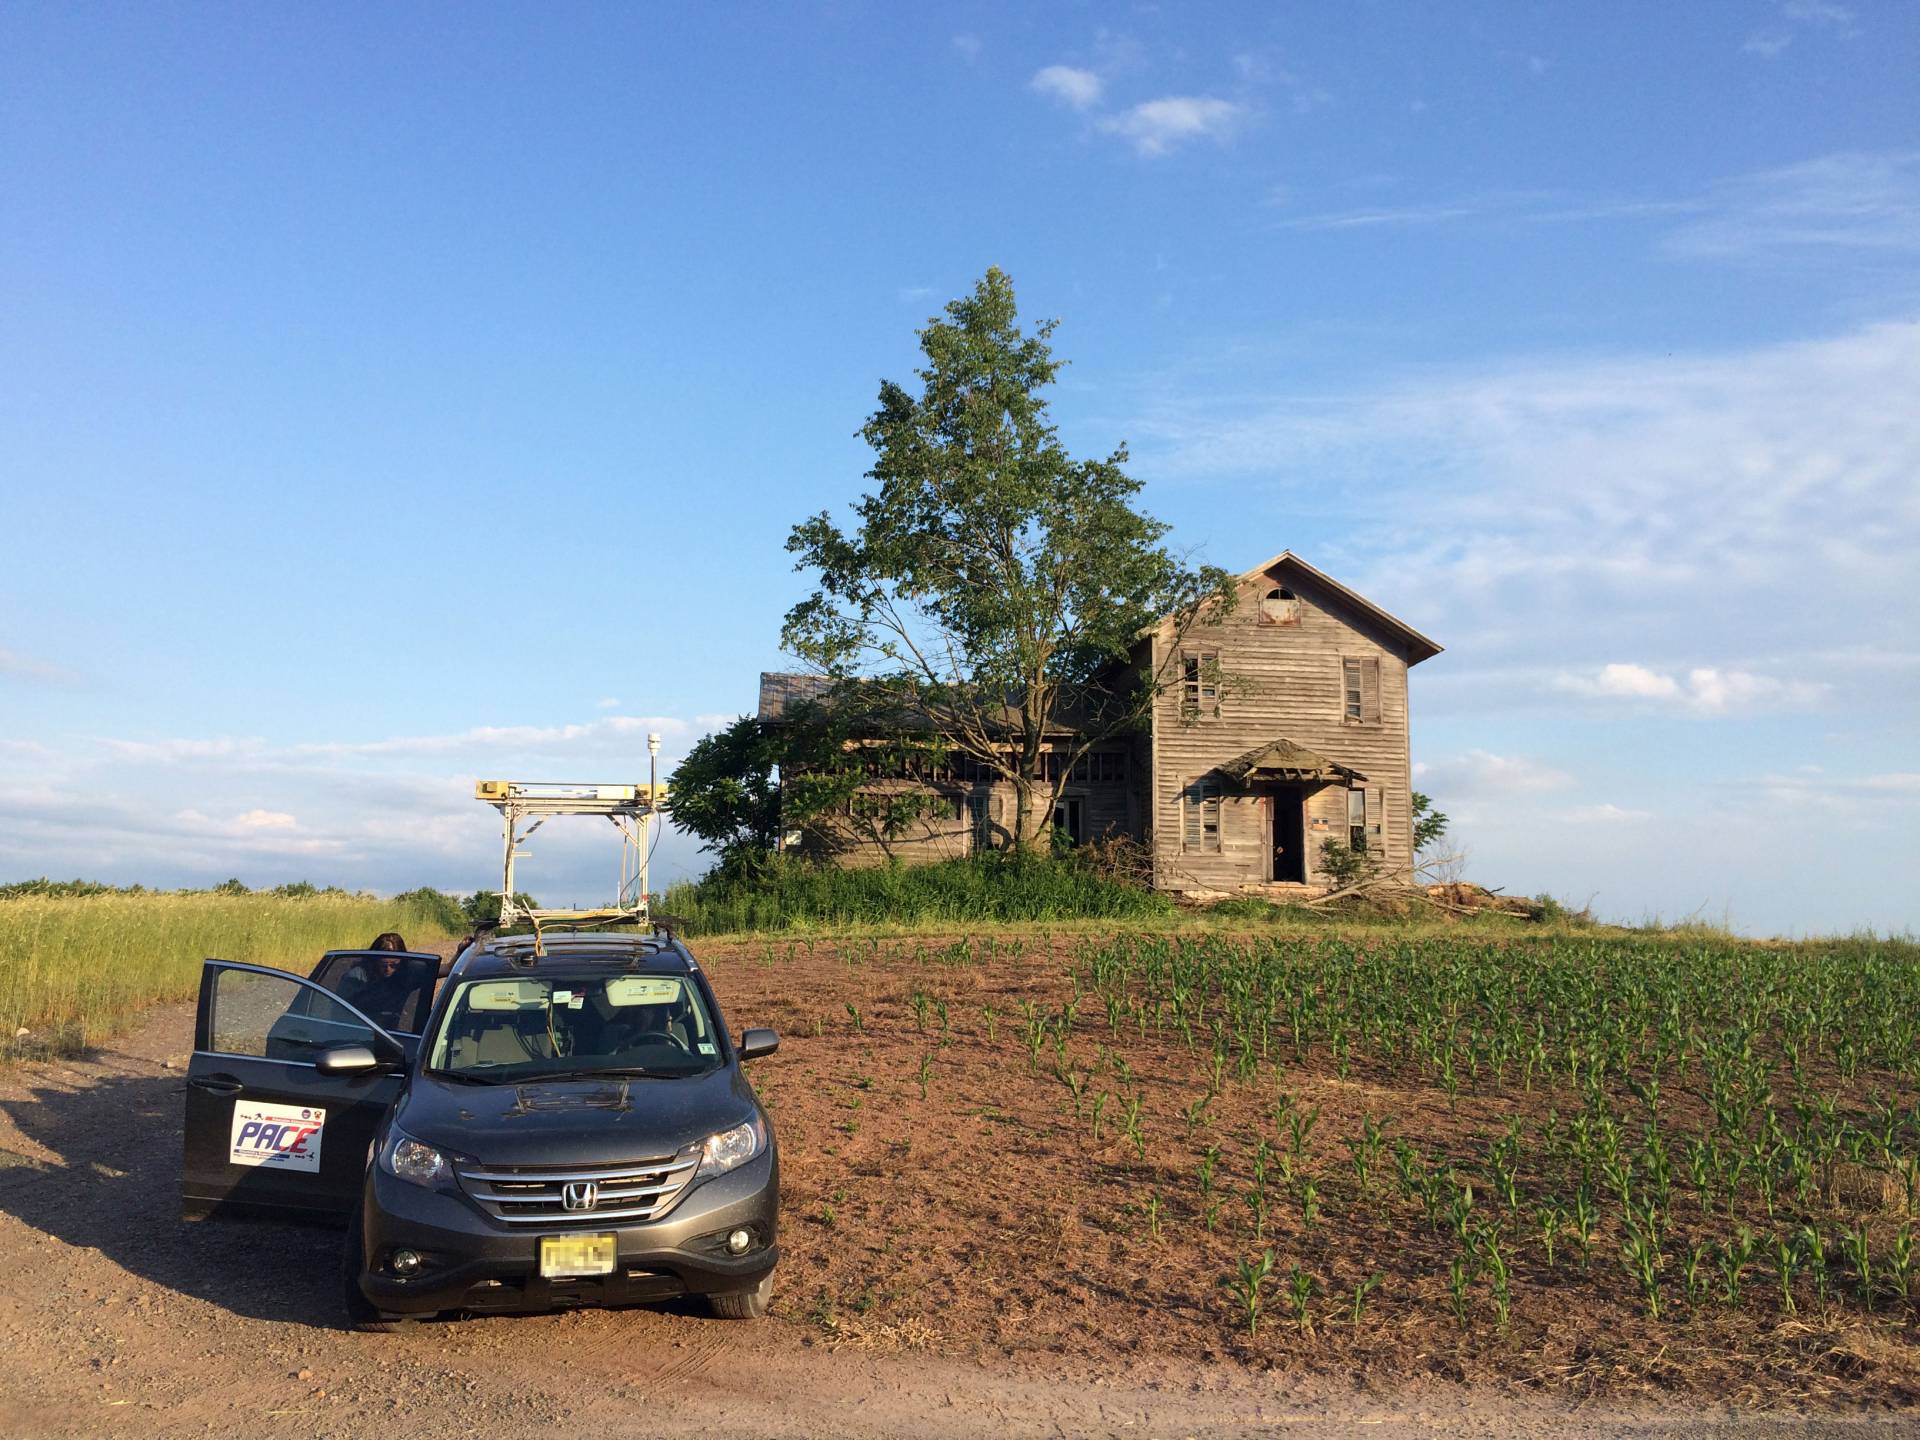 Mobile lab in front of farmhouse in a corn field